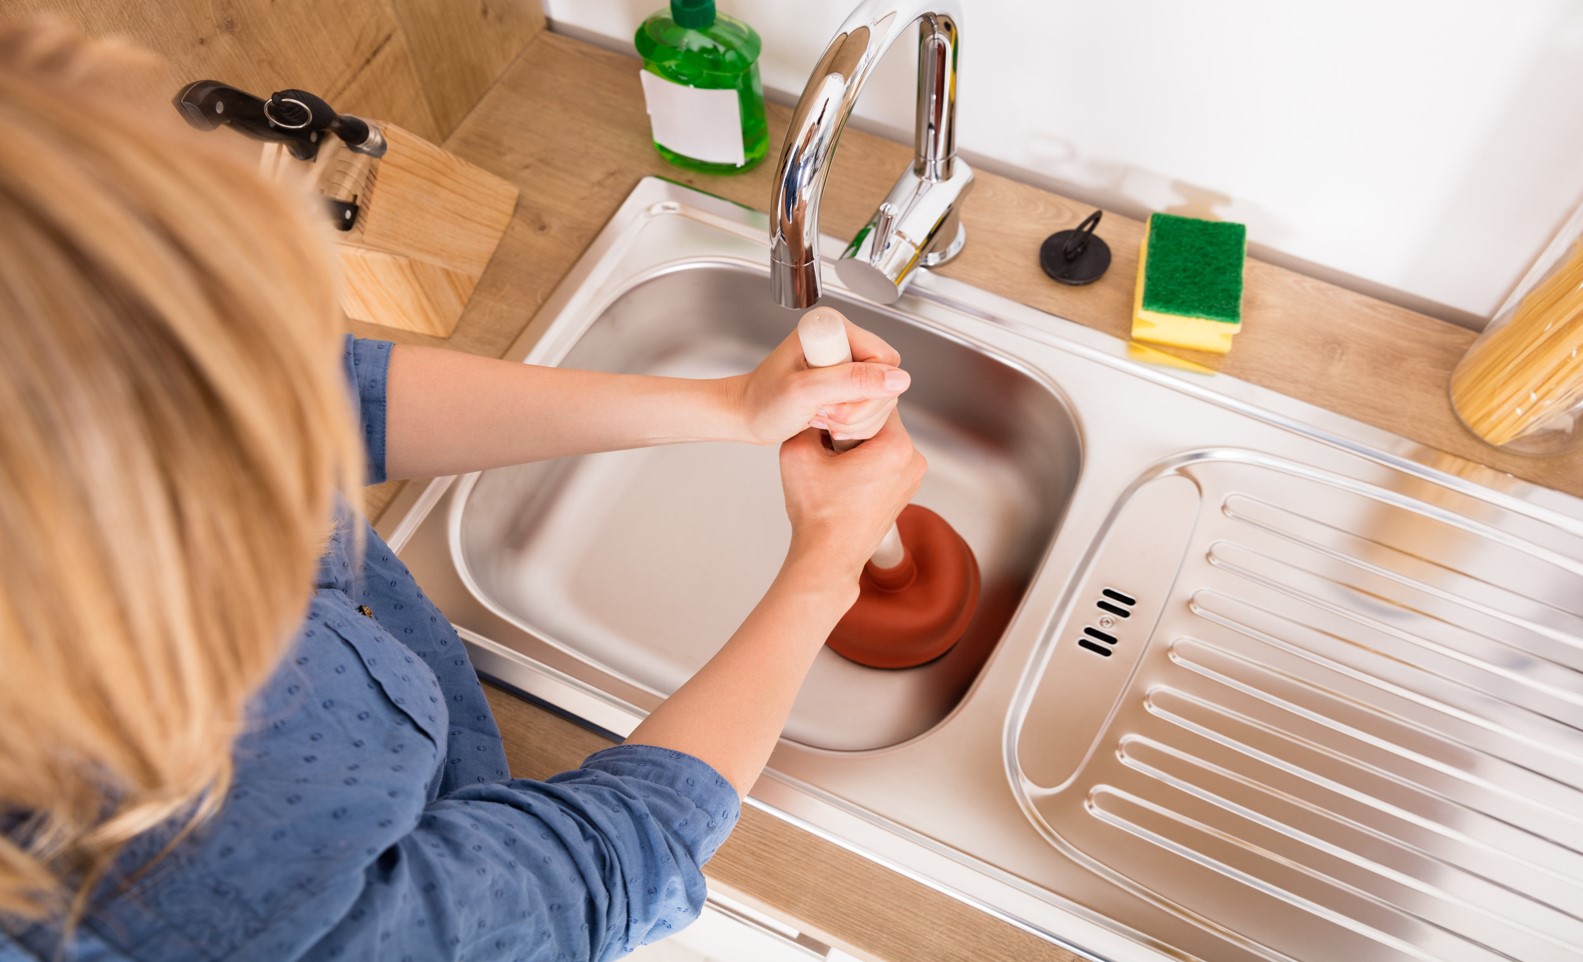 How Do You Unclog a Severely Clogged Drain?